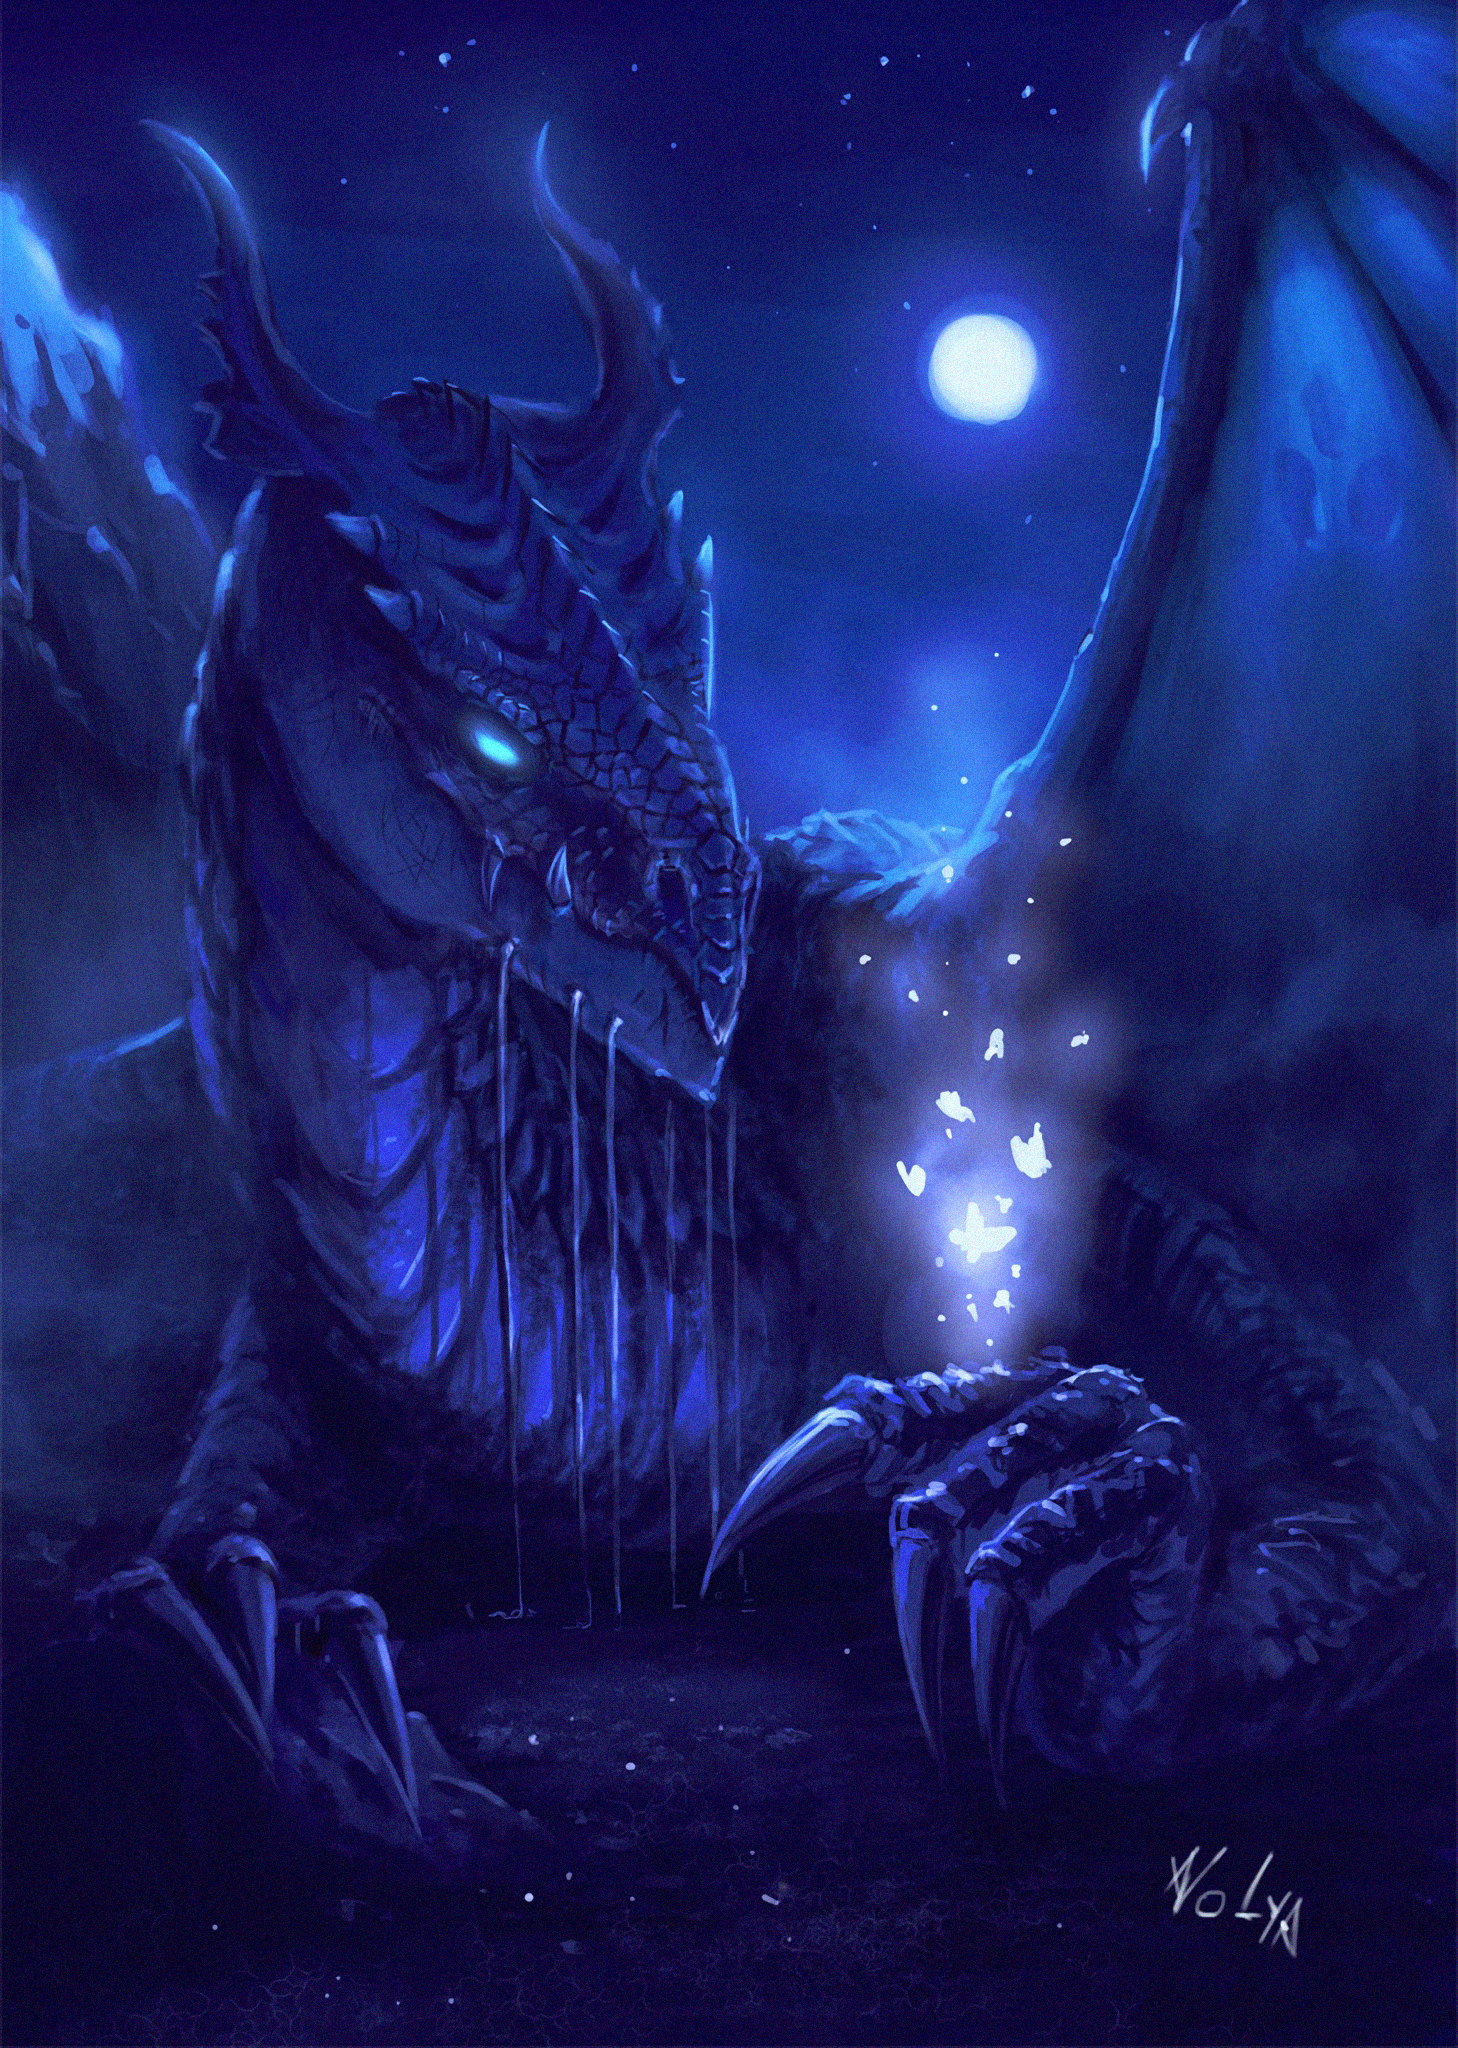 android dragon, fantastic, art, night, being, creature